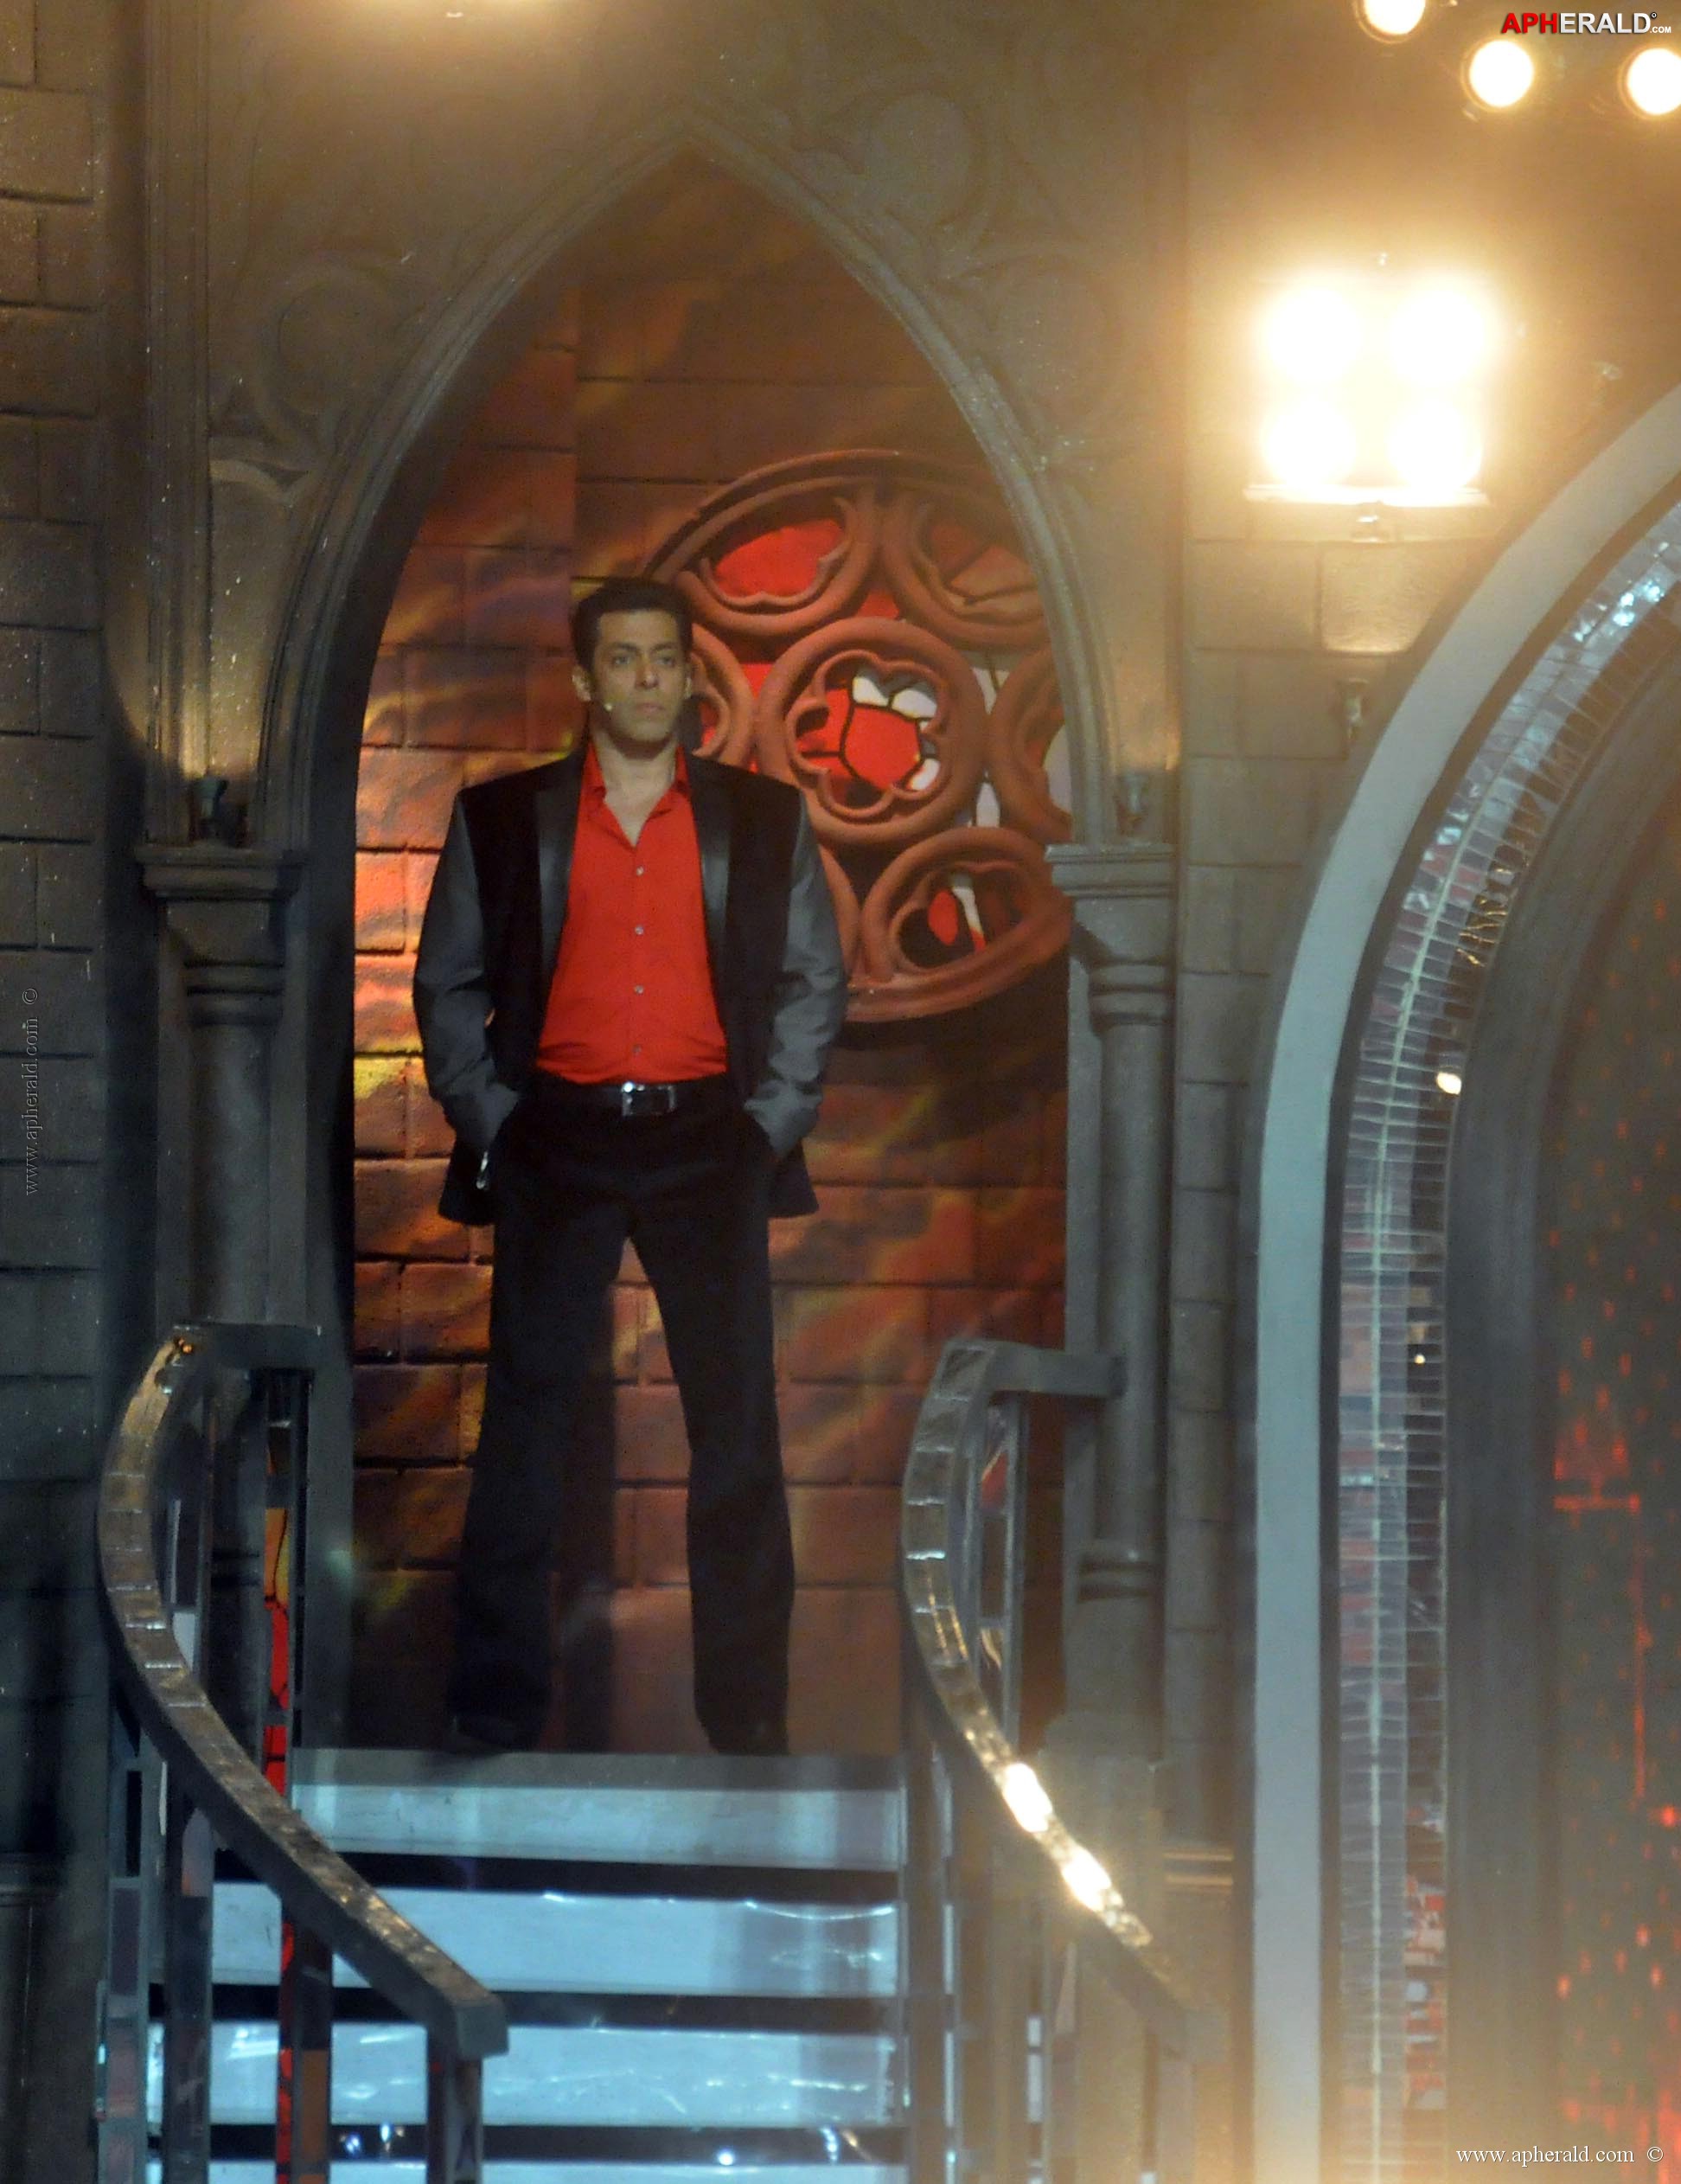 Anil Kapoor on the sets of Bigg Boss 7